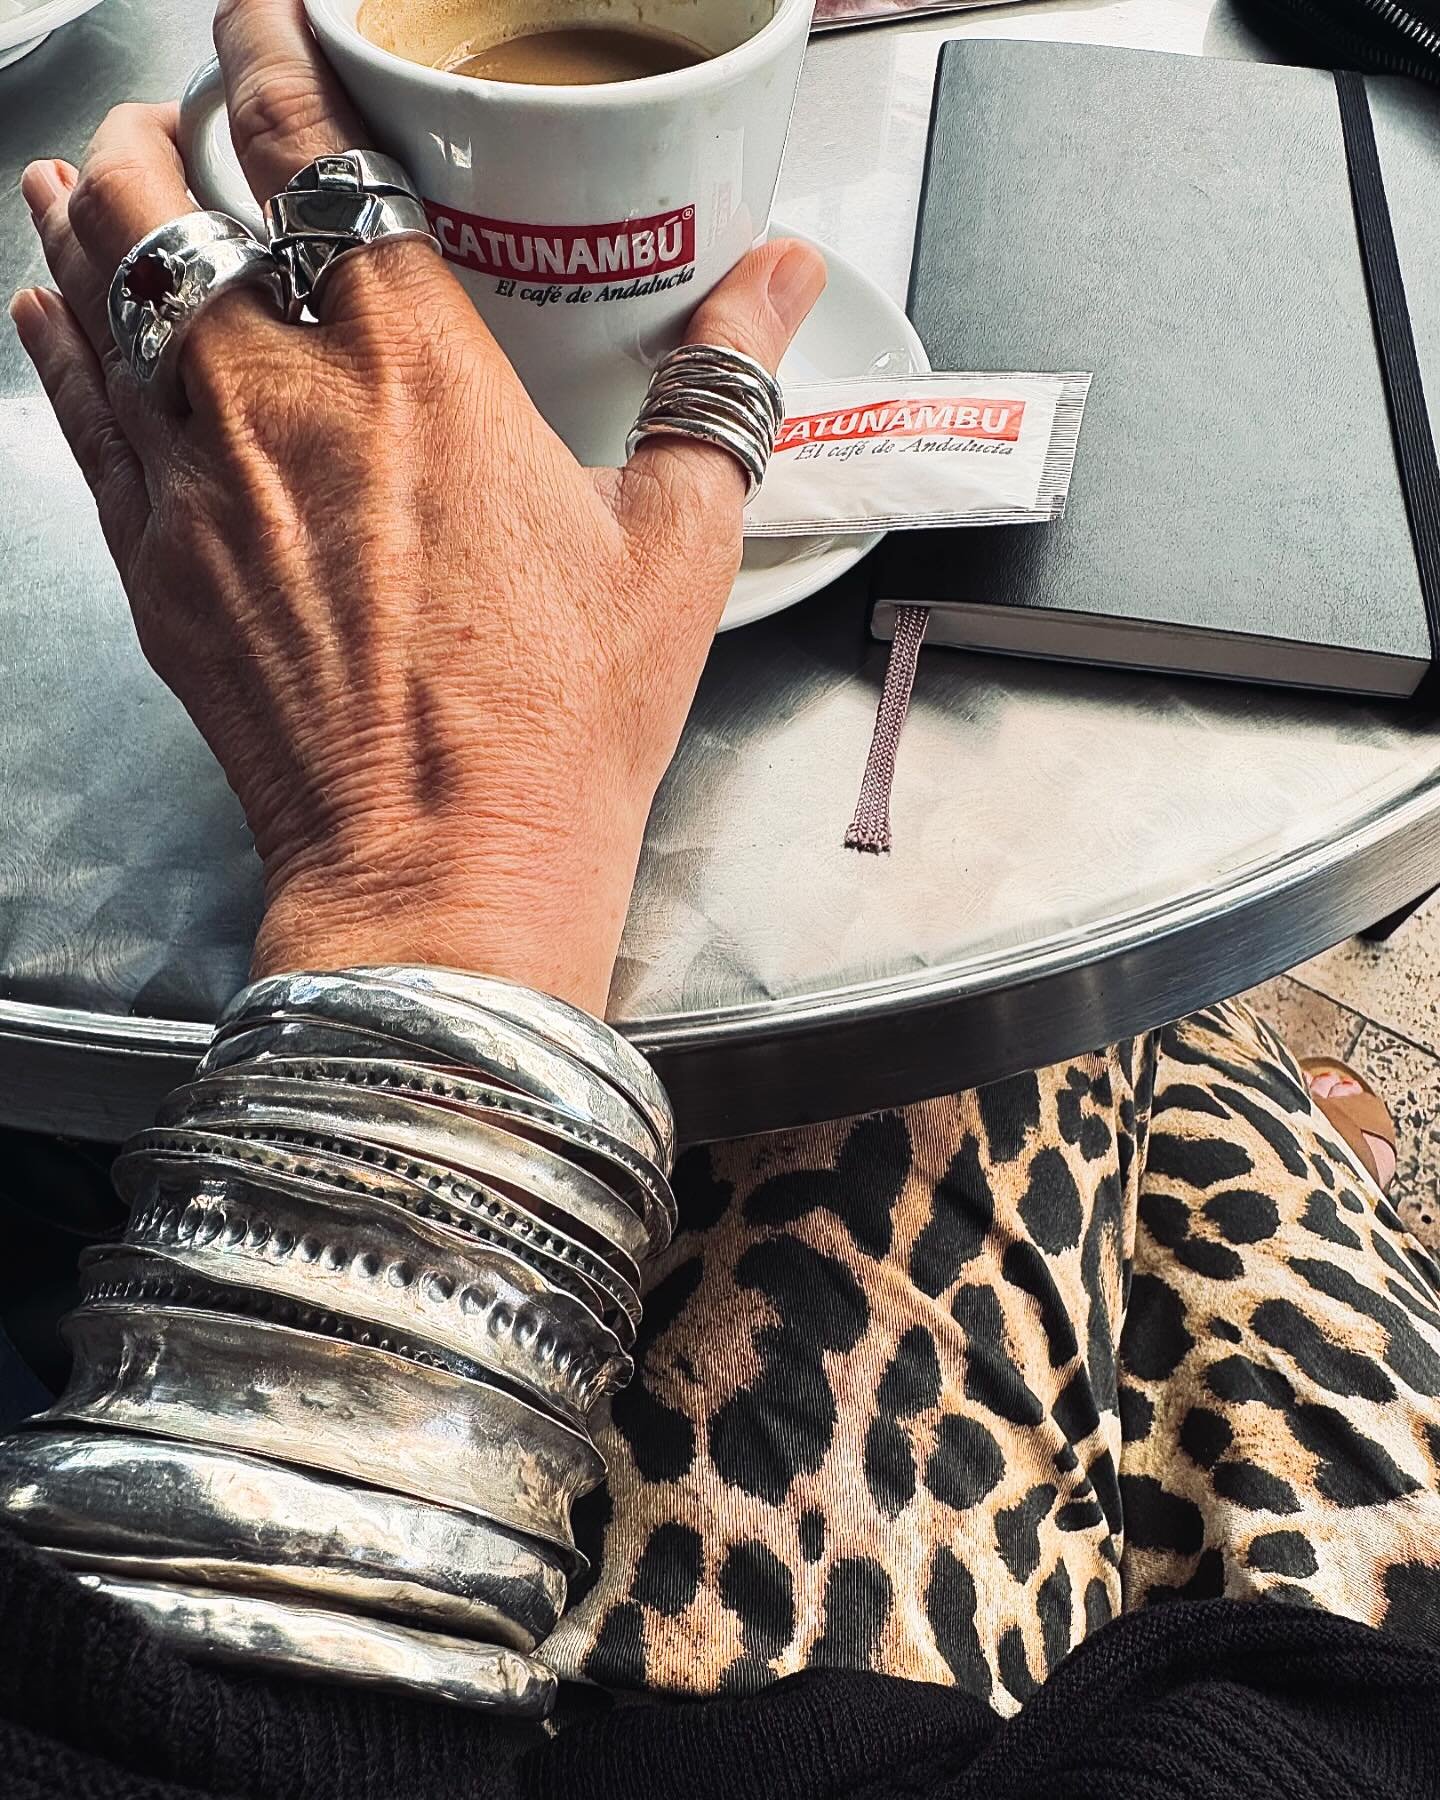 Hola Espana ~ It&rsquo;s soooo nice to be back!!! Bx 
:
:
#custommade #chunky #bracelets #handmade #triballuxe #raw #real #silver #jewelry #jewelrydesigner #mystyle #musthave #spain #costadelsol #statementjewelry #womendesigningforwomen #ewajewelry #